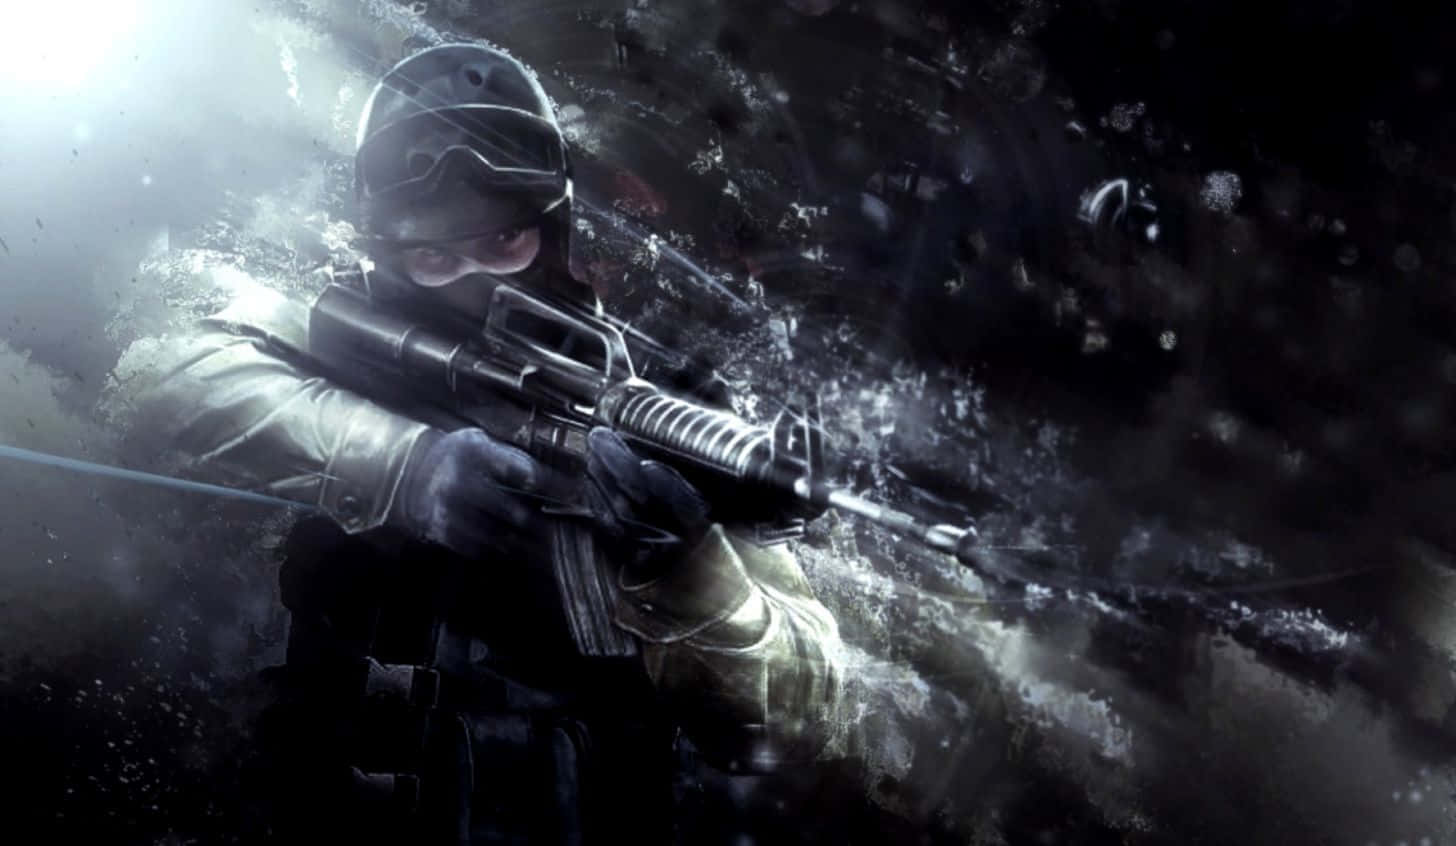 Sniping Player Counter Strike Global Offensive Background 1456 x 846 Background